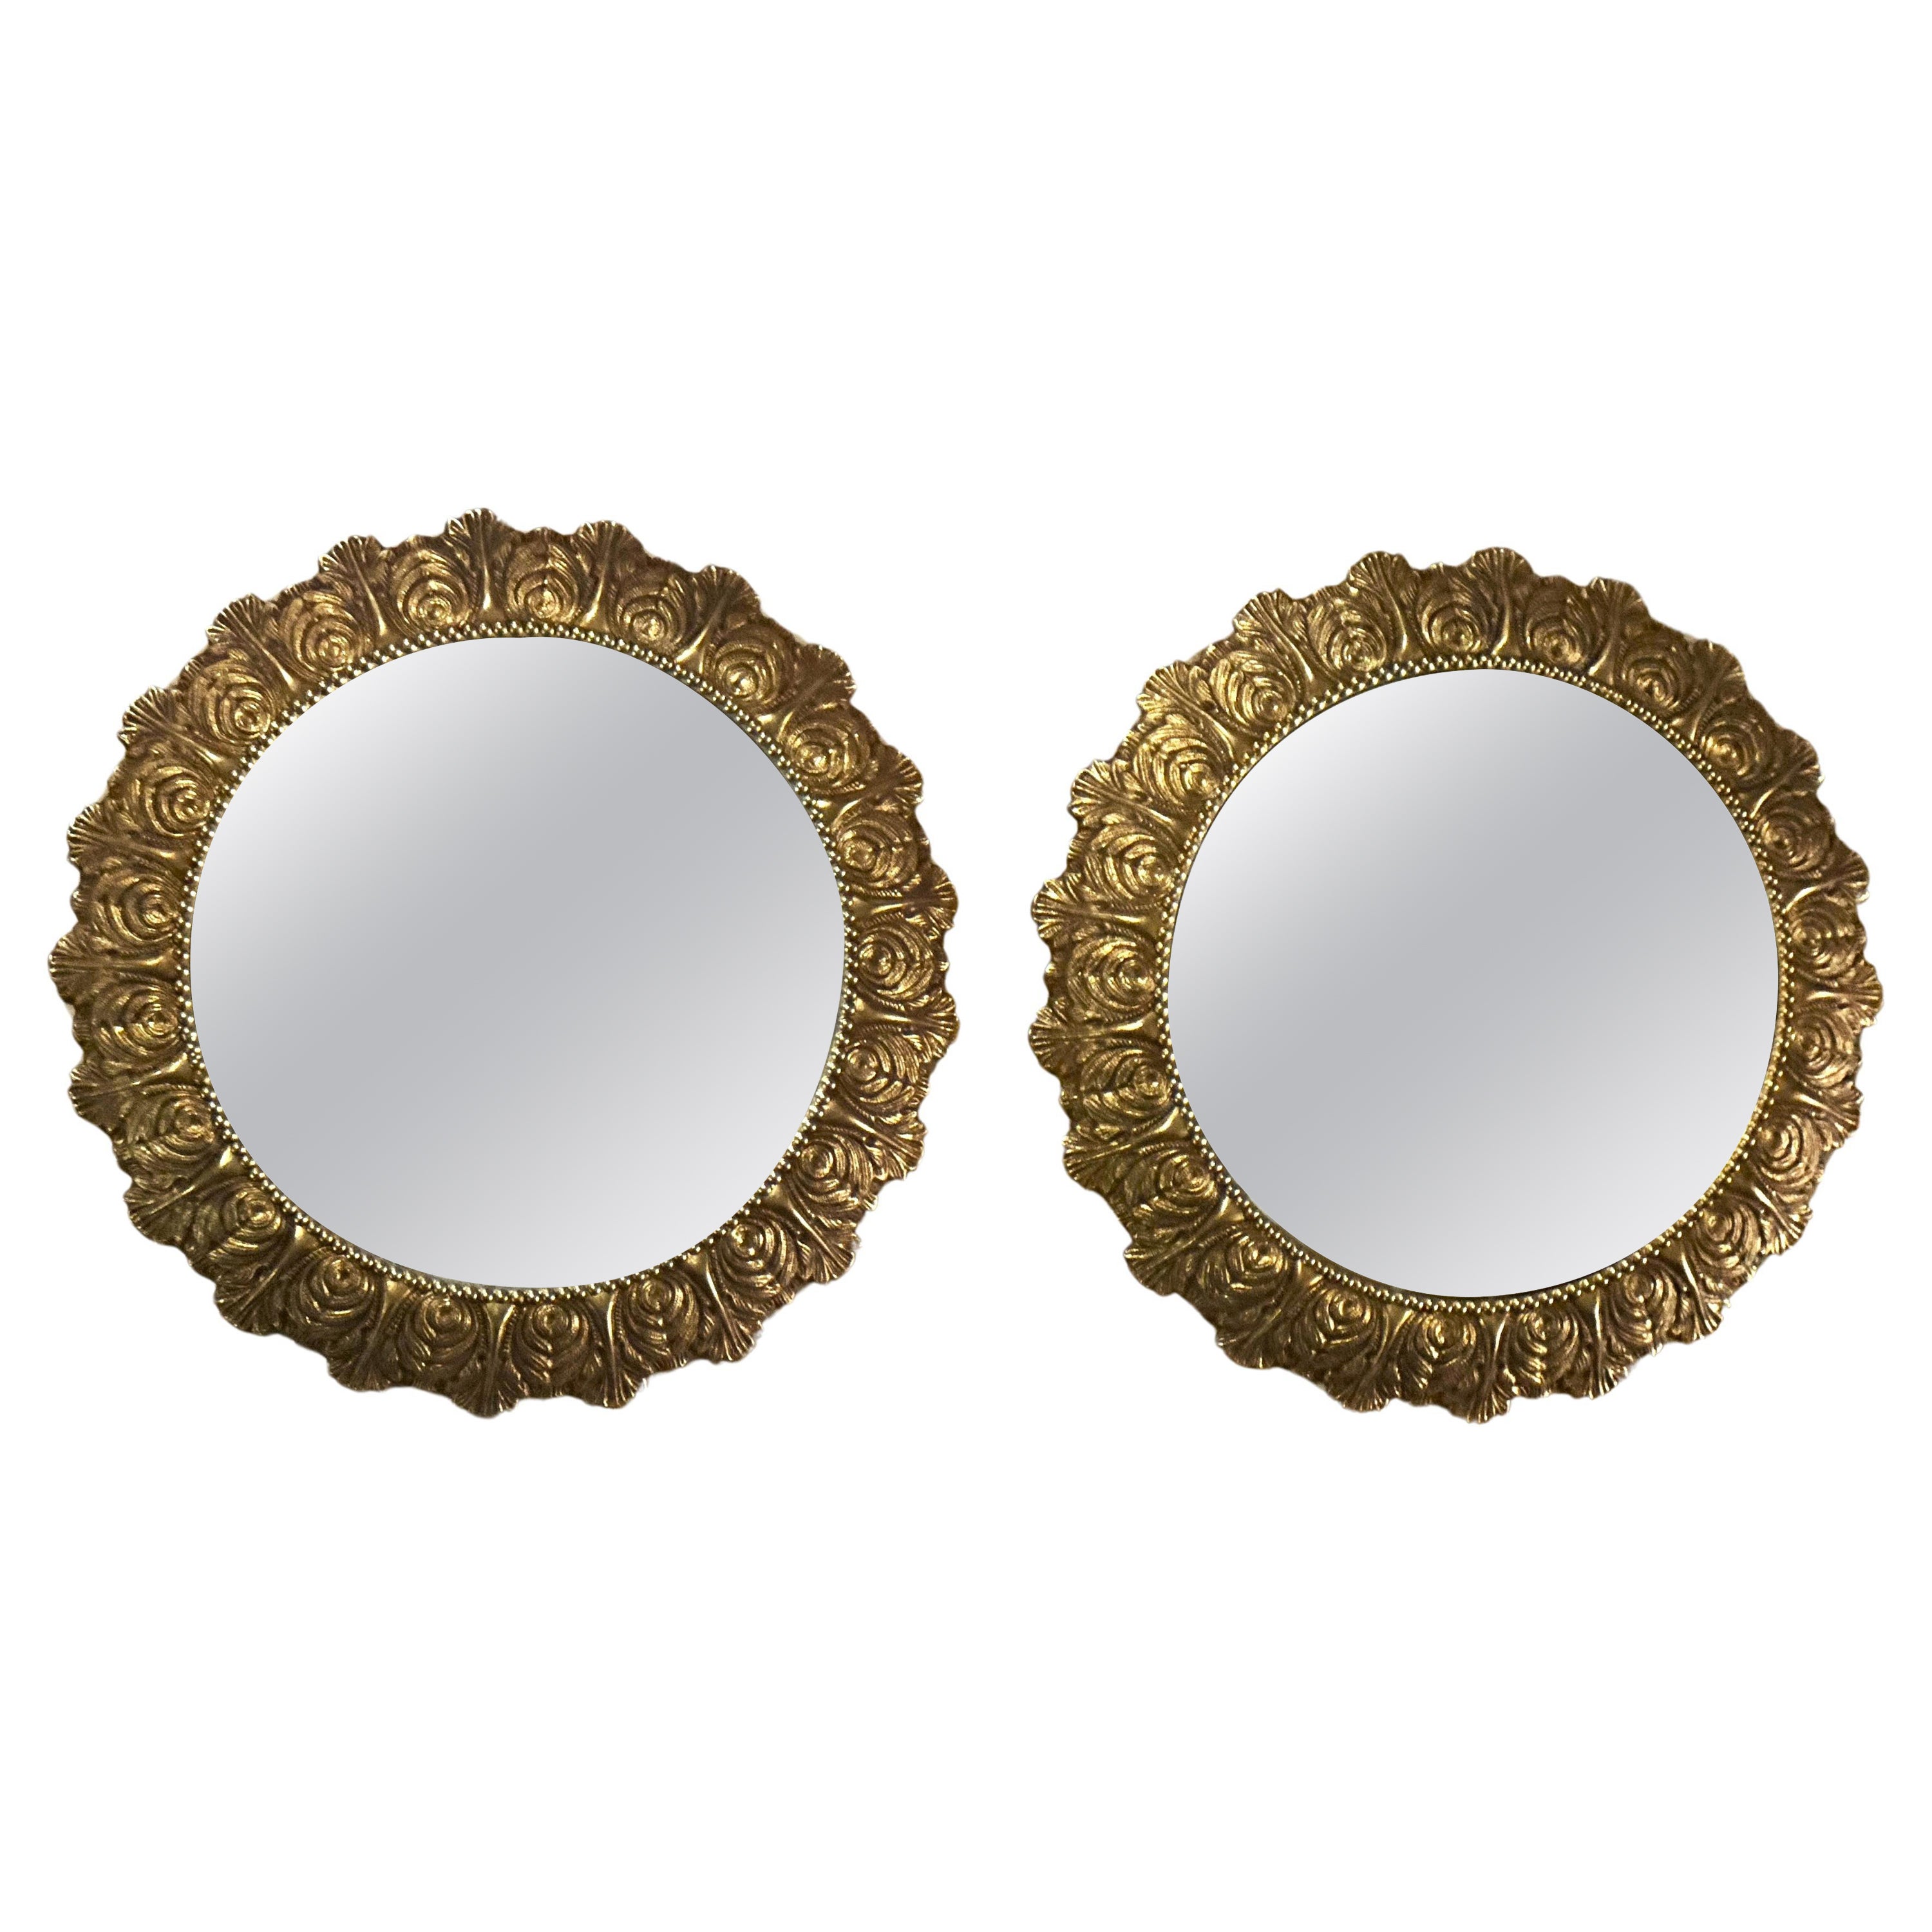 Pair of Brass Mid-Century Mirrors, France 1950s For Sale